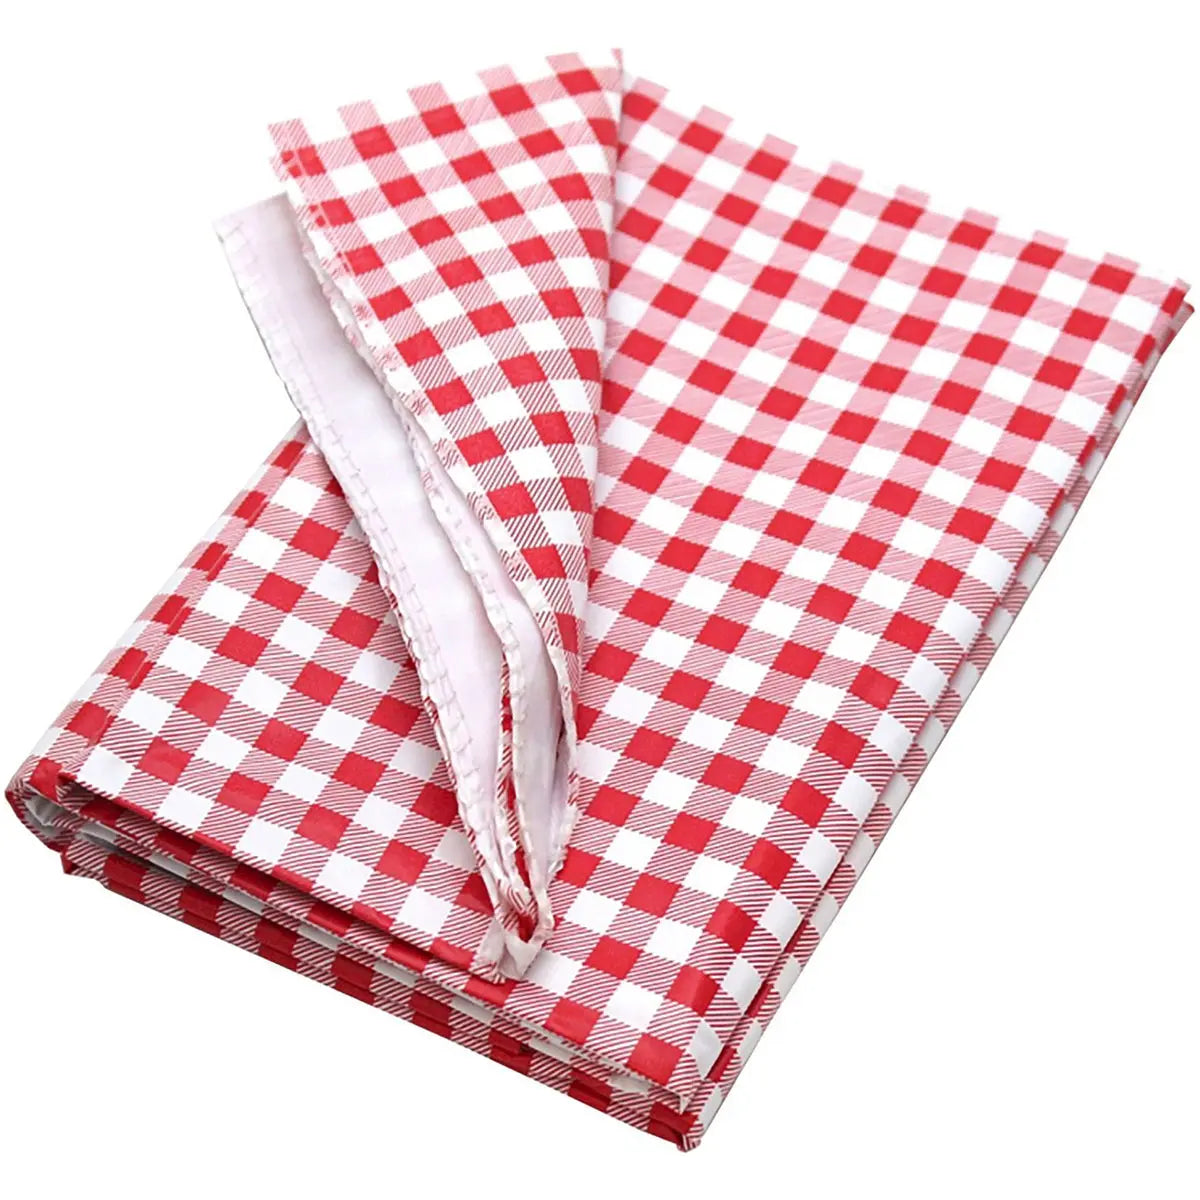 Coghlan's Picnic Combo Pack w/ 54"x72" Tablecloth & 6 Table Cloth Spring Clamps Coghlan's